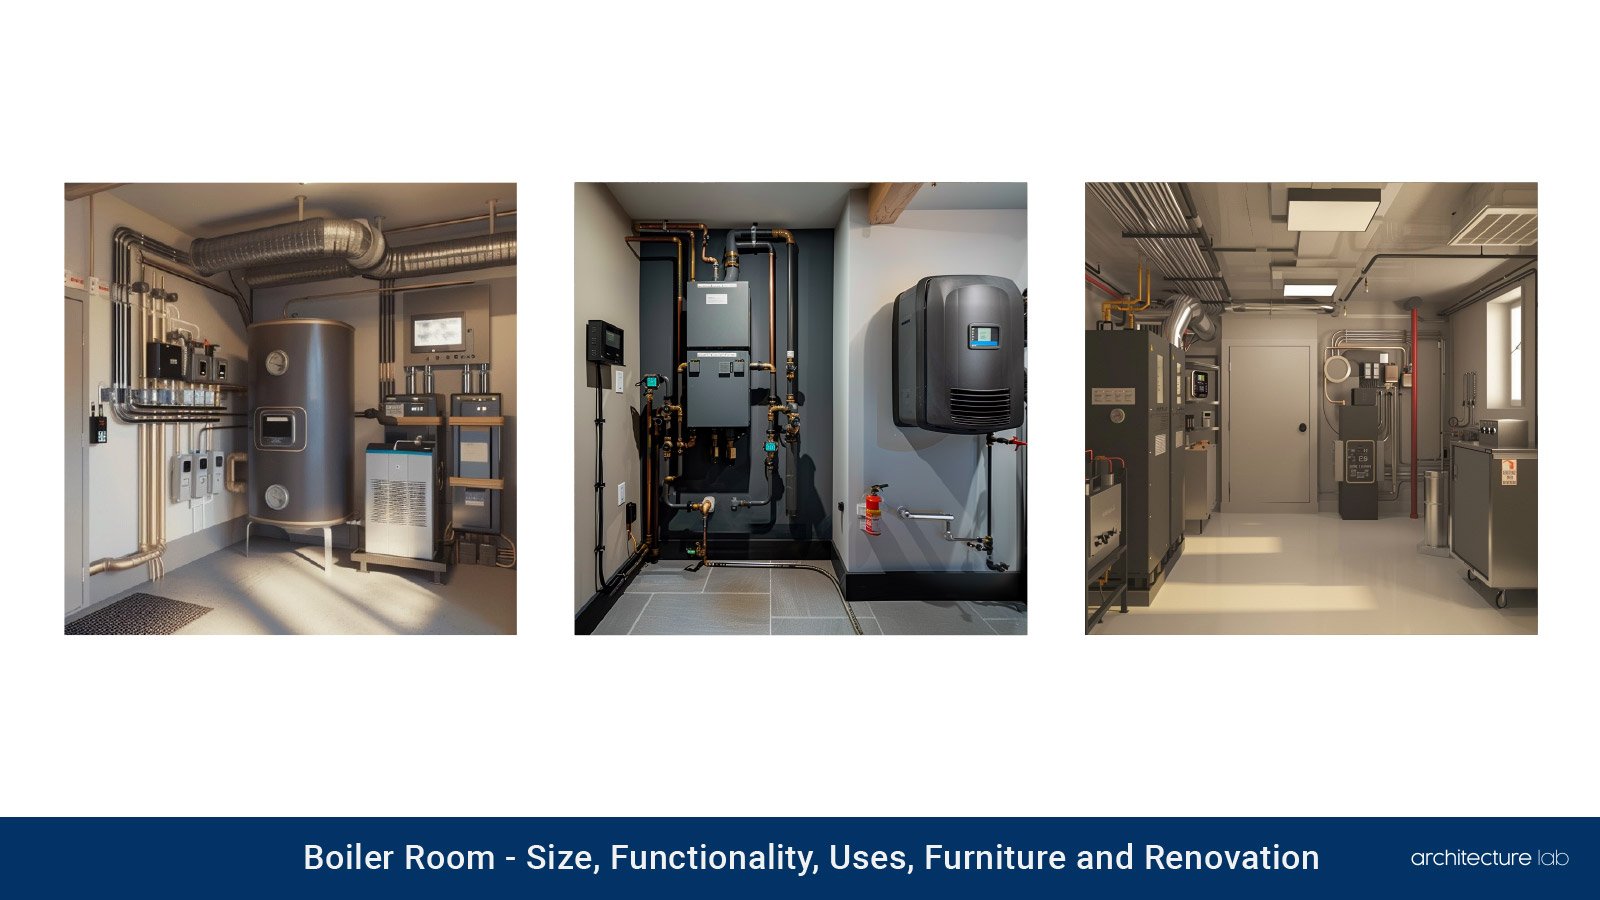 Boiler room: size, functionality, uses, furniture, and renovation